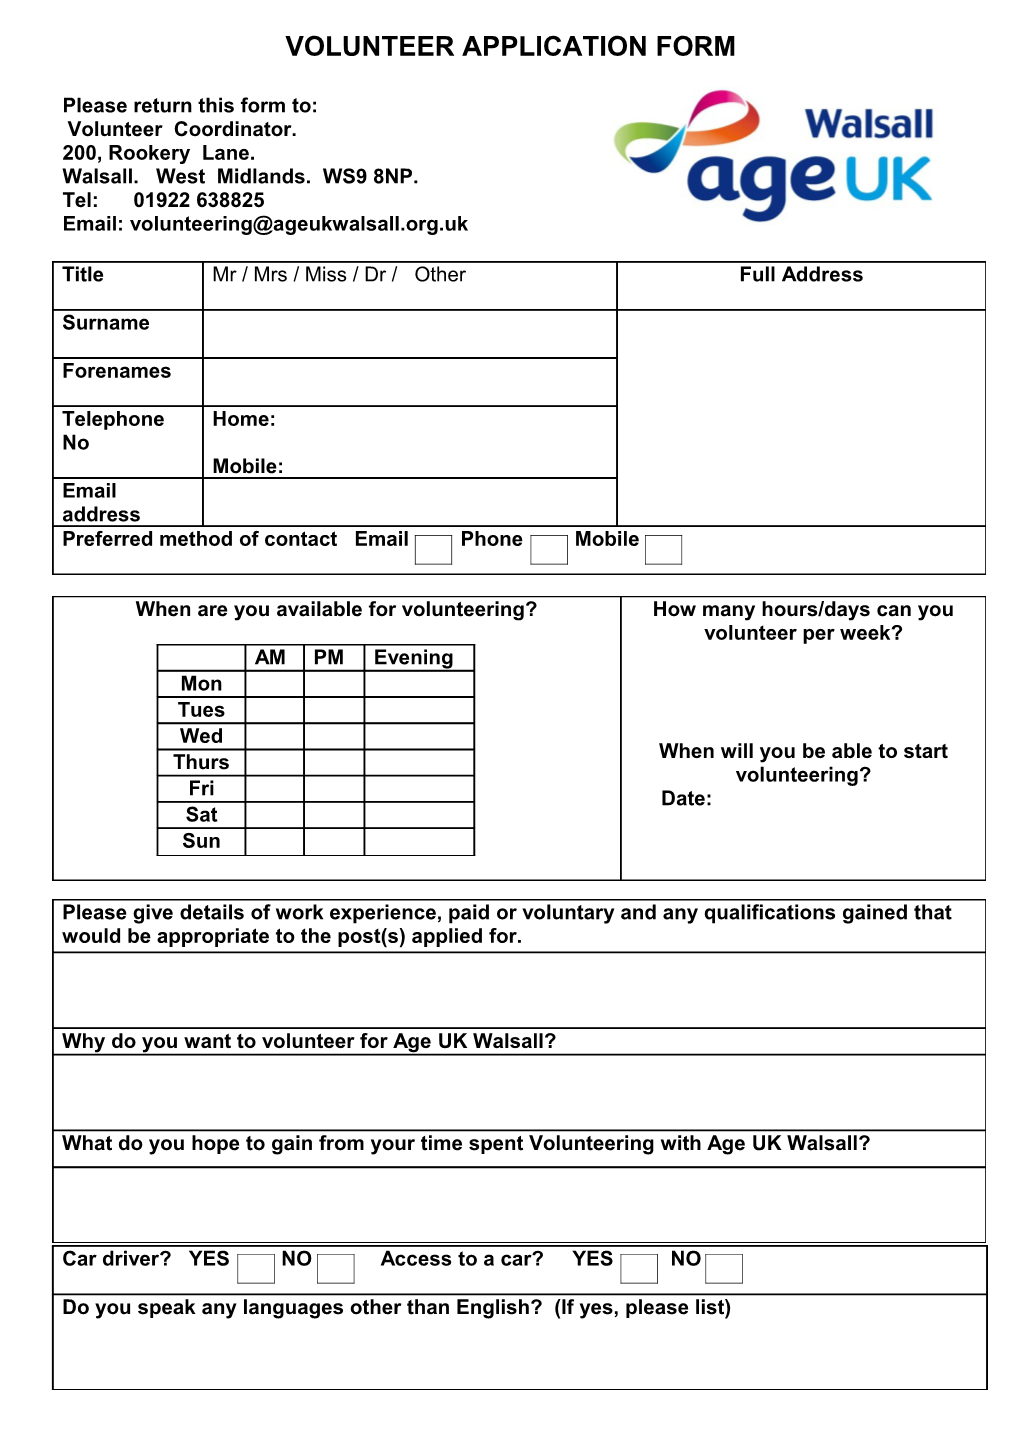 Please Return This Form To s1